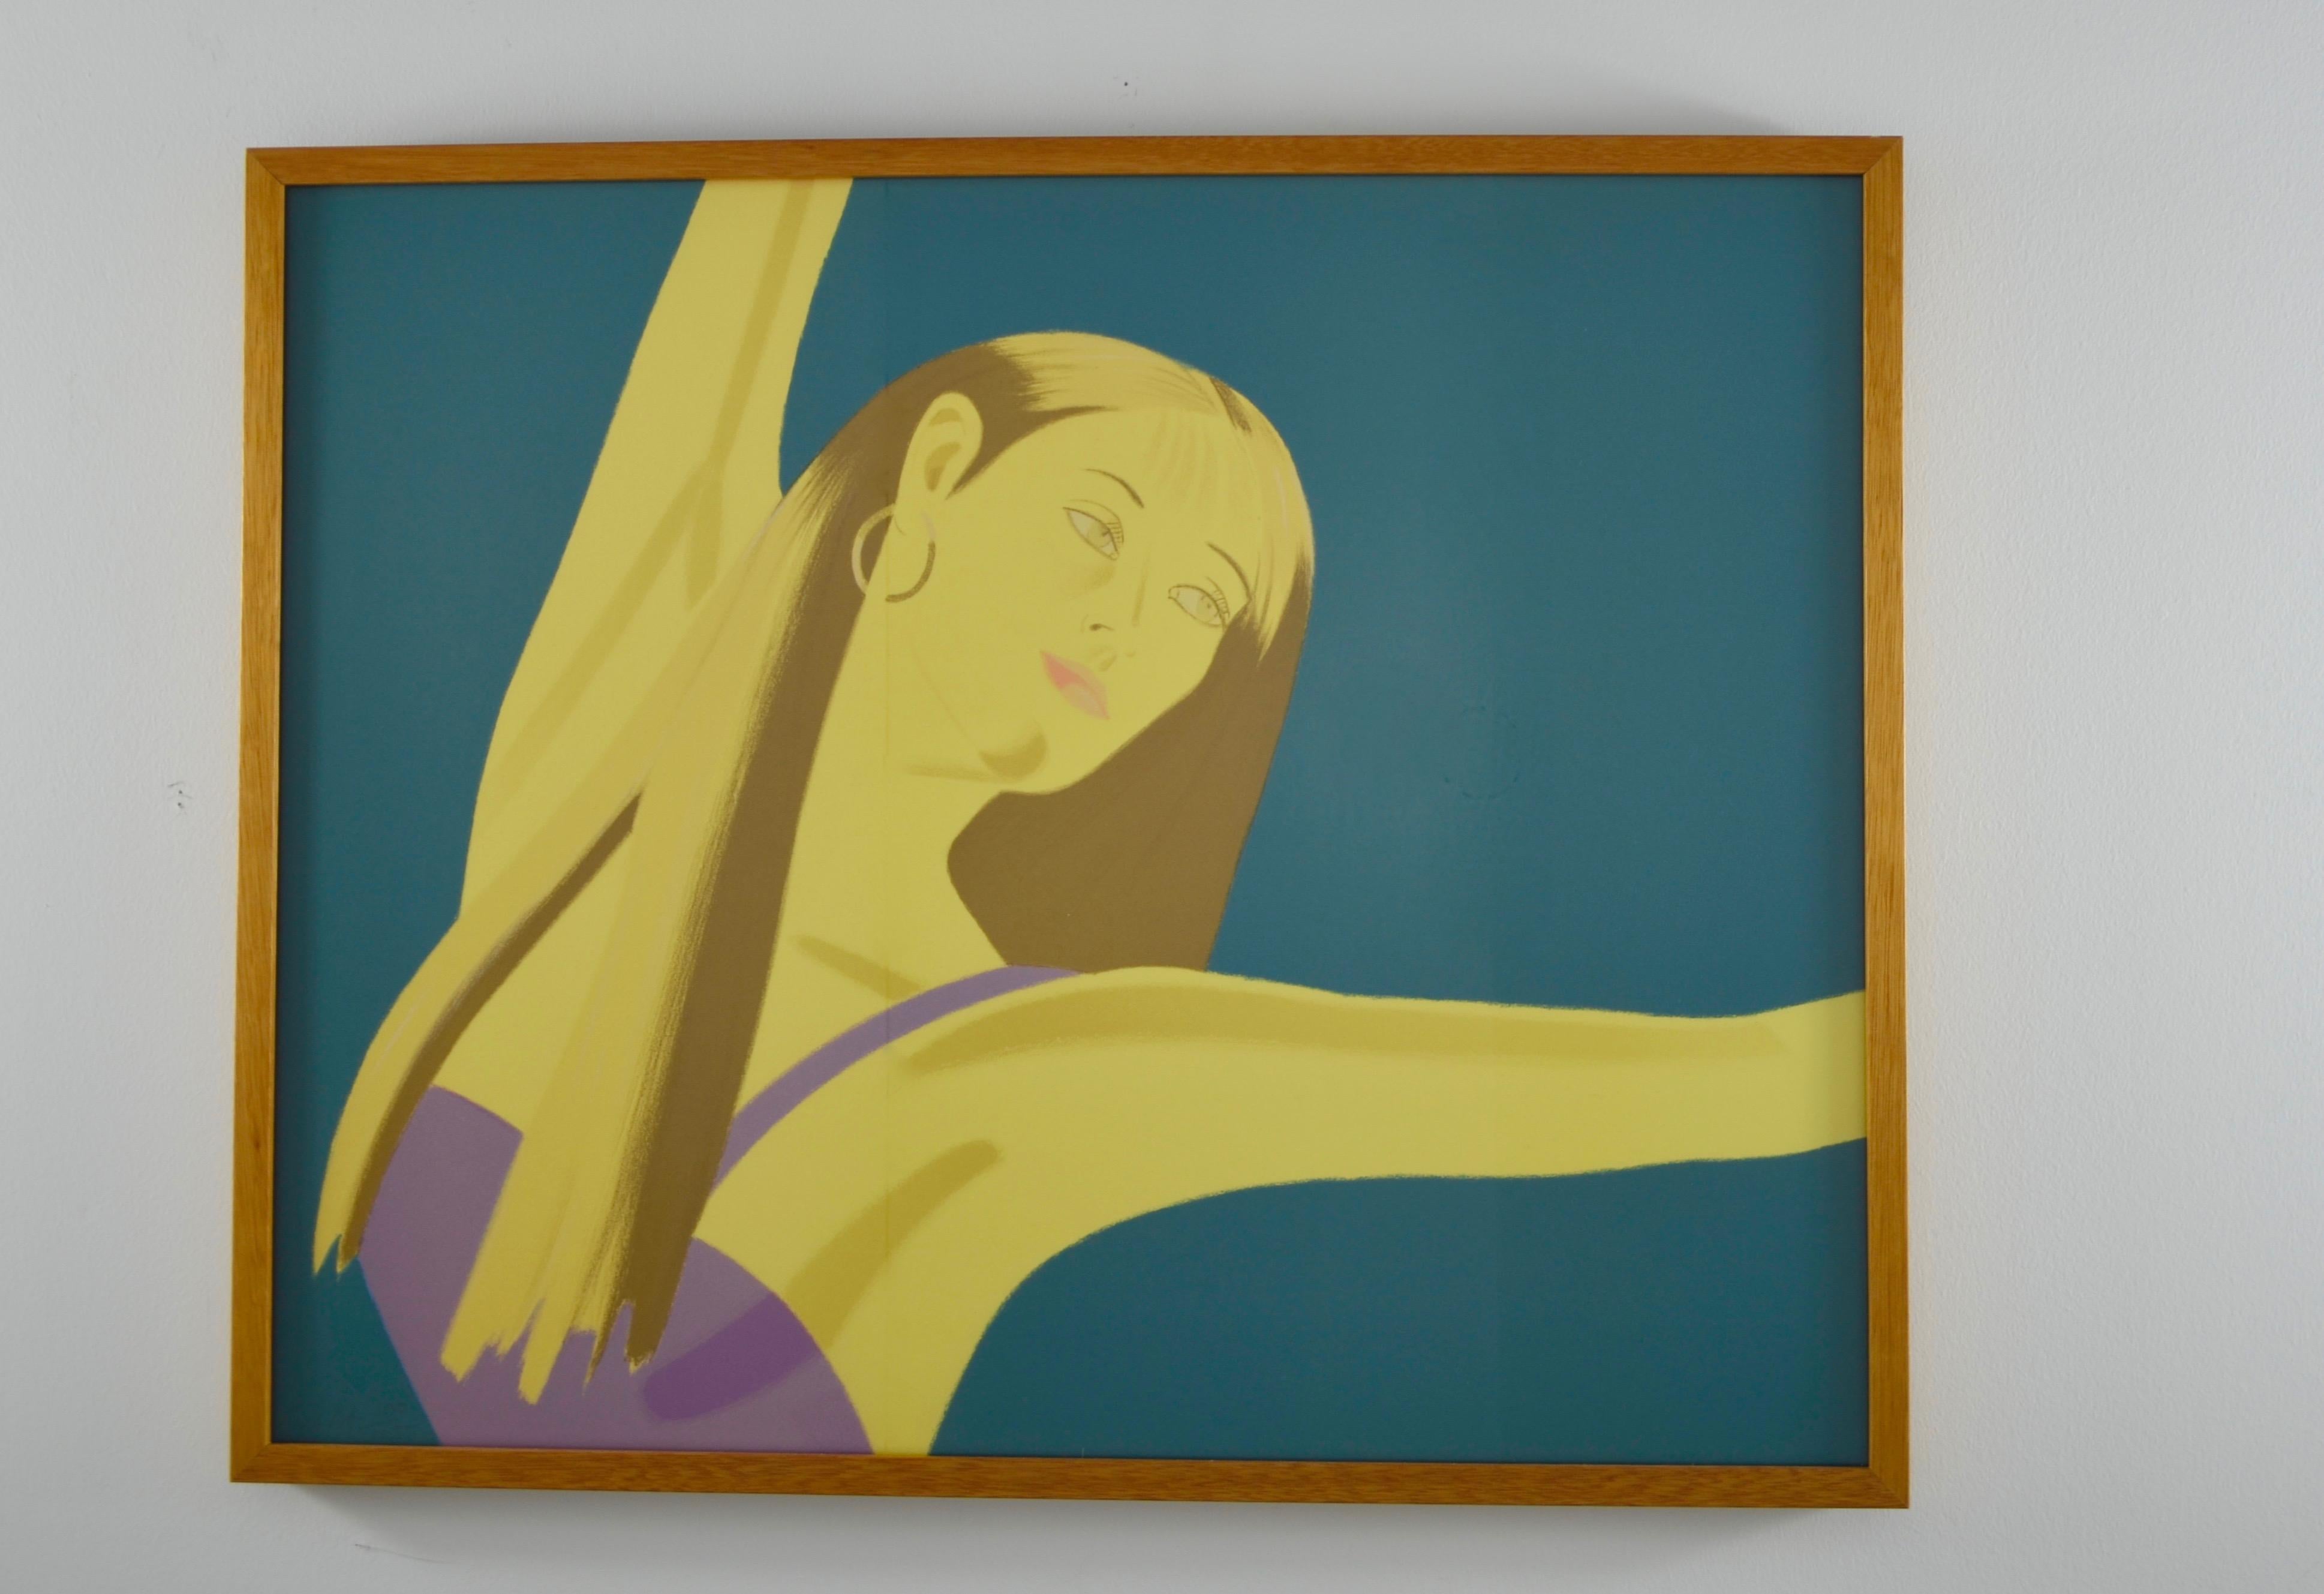 Offered is a framed suite of four 20th century Pop Art artist, Alex Katz signed and numbered lithographs, Night: William Dunas Dance Suite, 1979. Editions: 100/100, 100/125, AP 42/42 and 100/100. Two of the signatures are shown with the listing. All